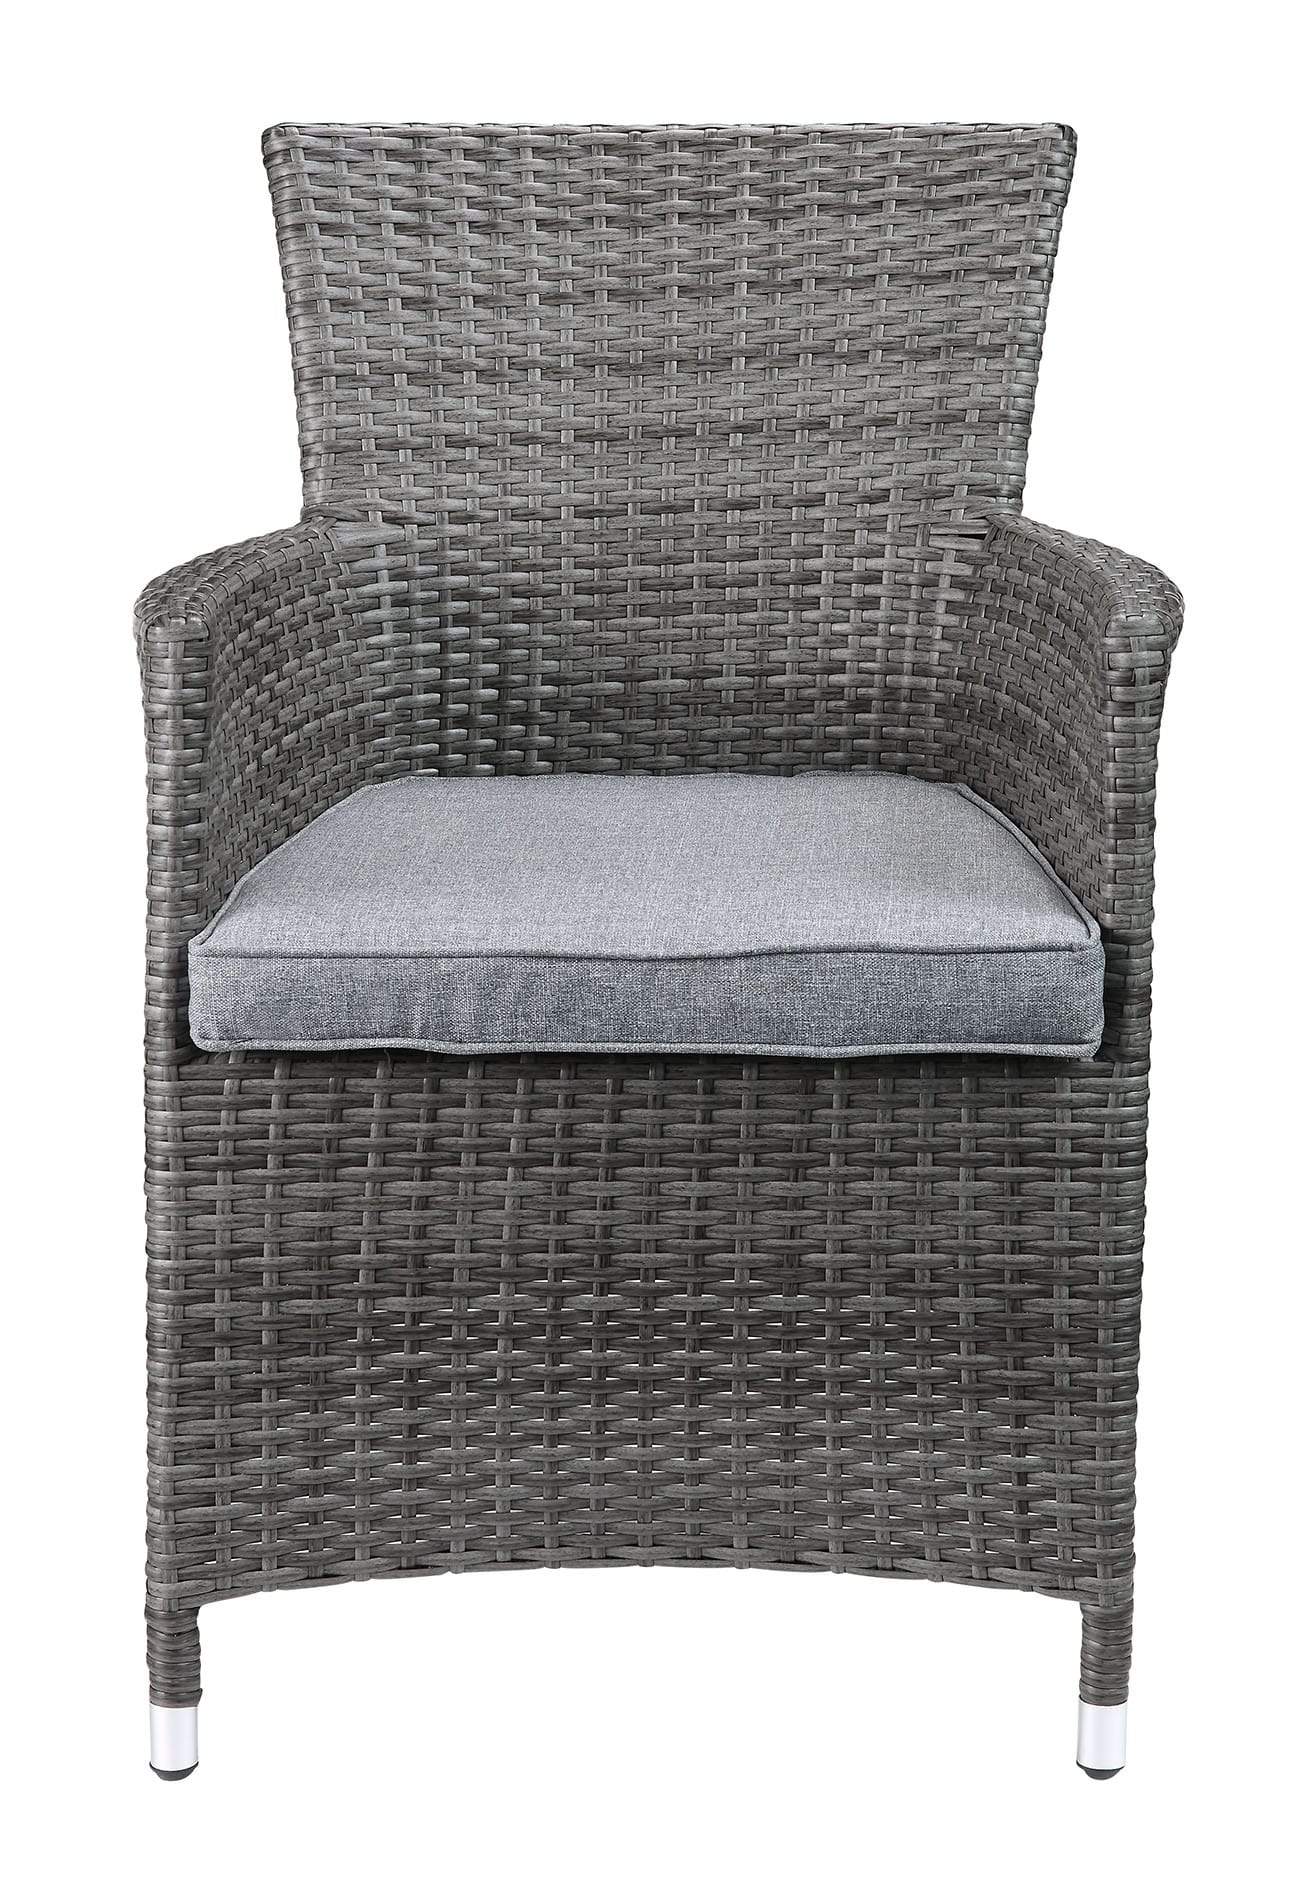 HomeRoots Outdoors Outdoor Furniture > Outdoor Furniture Set Gray Fabric and Wicker / Synthetic Wicker, Glass, 24" X 24" X 35" 3Pc Gray Fabric And Wicker Patio Bistro Set